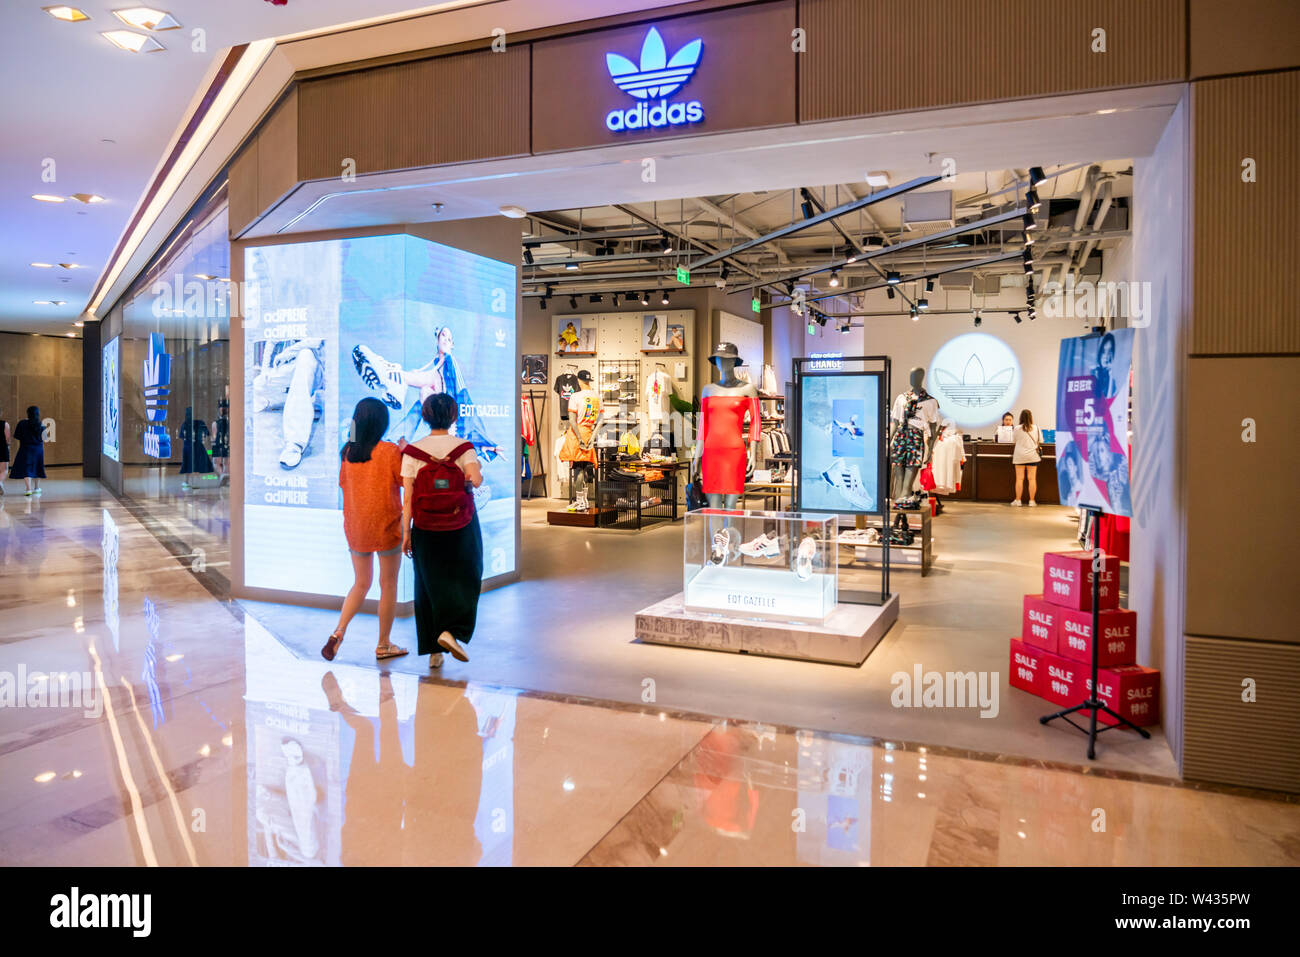 Stores That Sell Adidas Clothing Sale, 51% OFF | www.chine-magazine.com